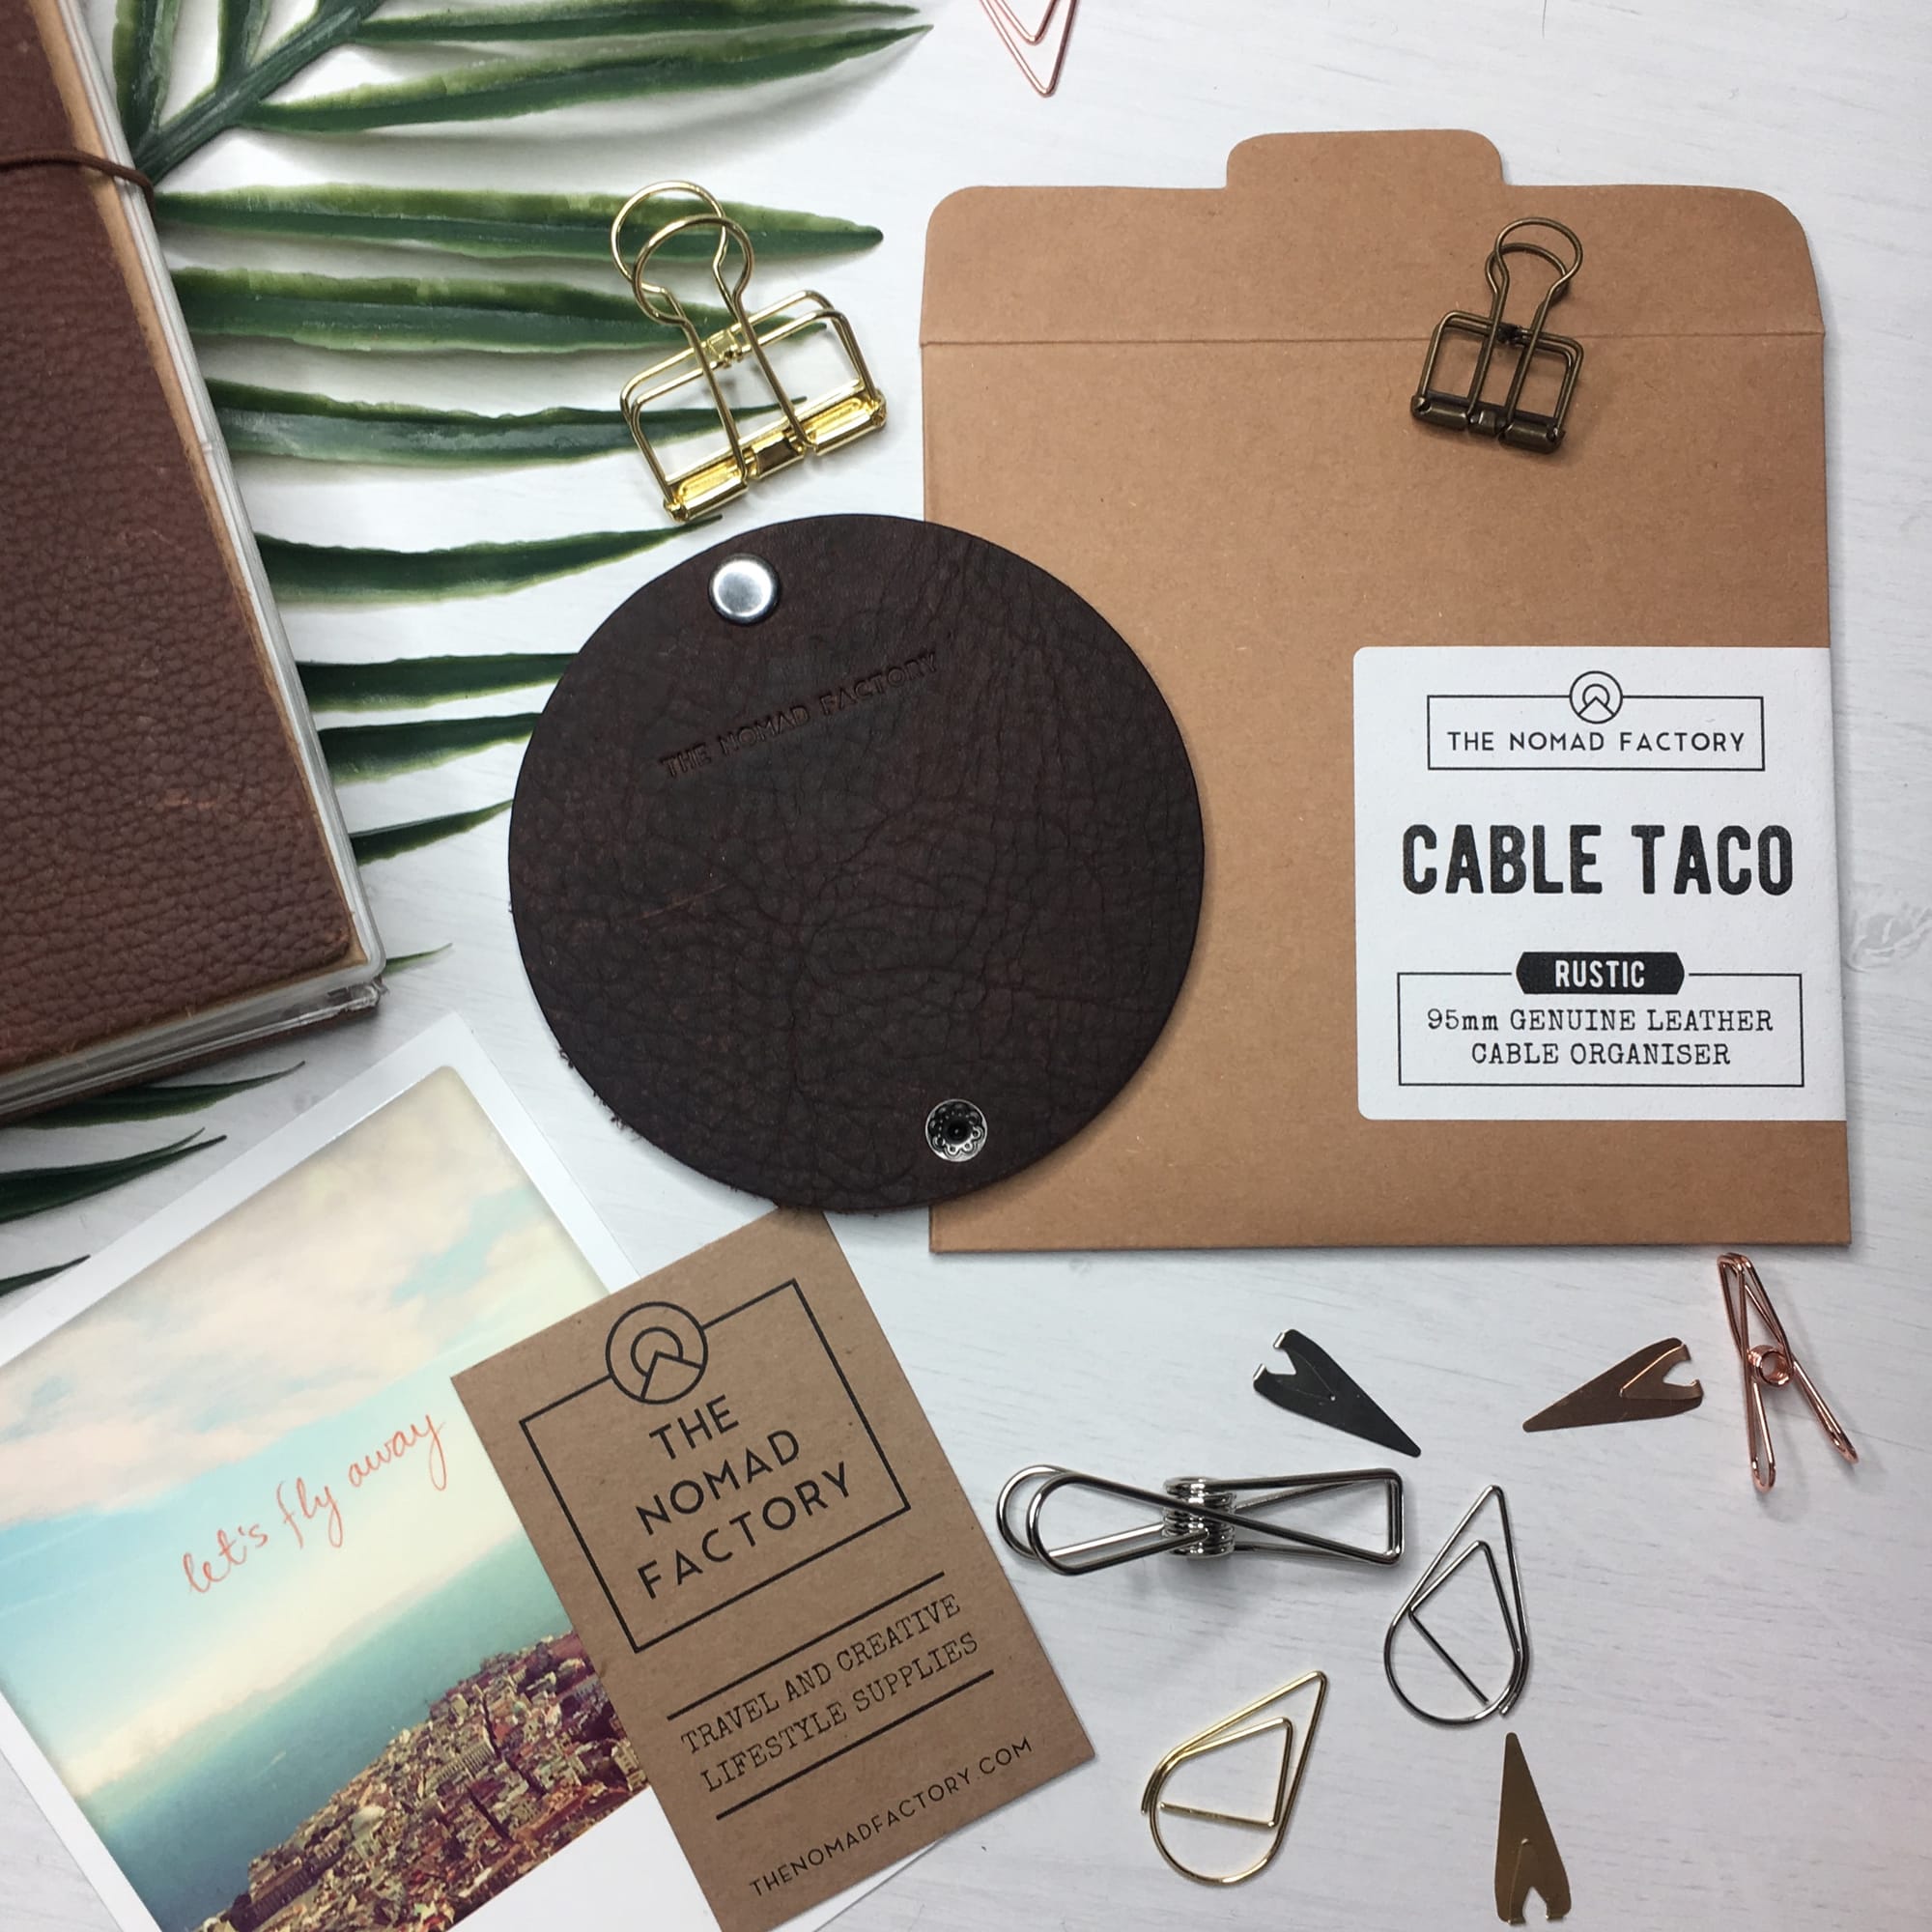 Cable Taco - The Nomad Factory Review - Miss Boux